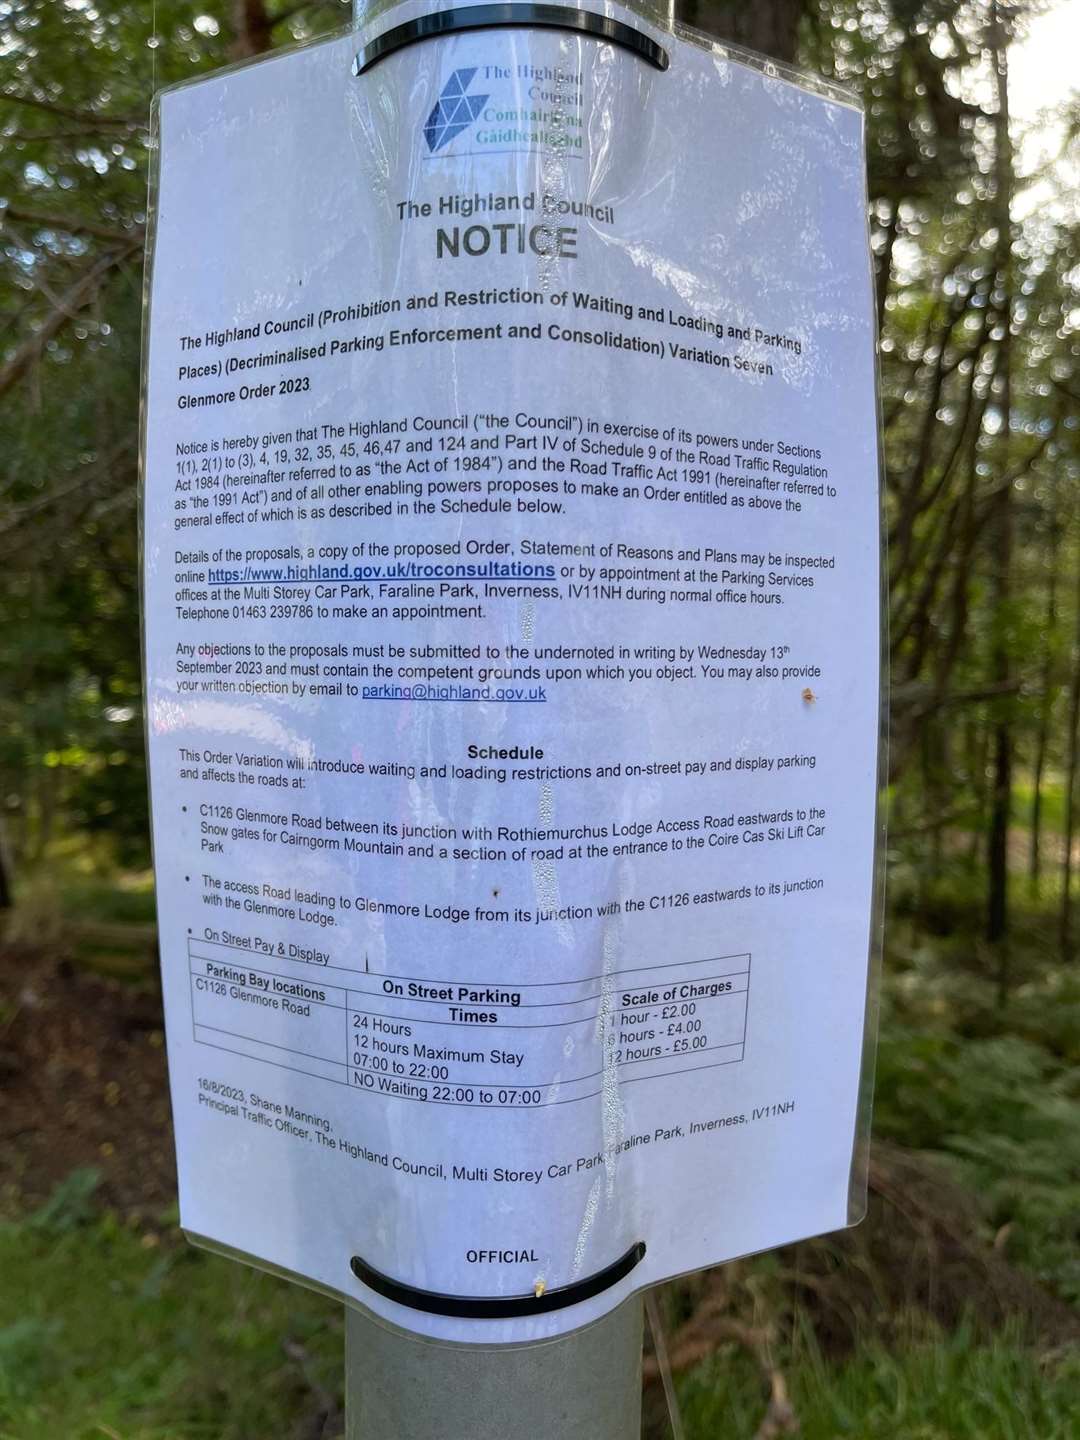 The advertisement of the parking notice proposals on display in Glenmore last Autumn. They have now been amended in response to the backlash in a public consultation.